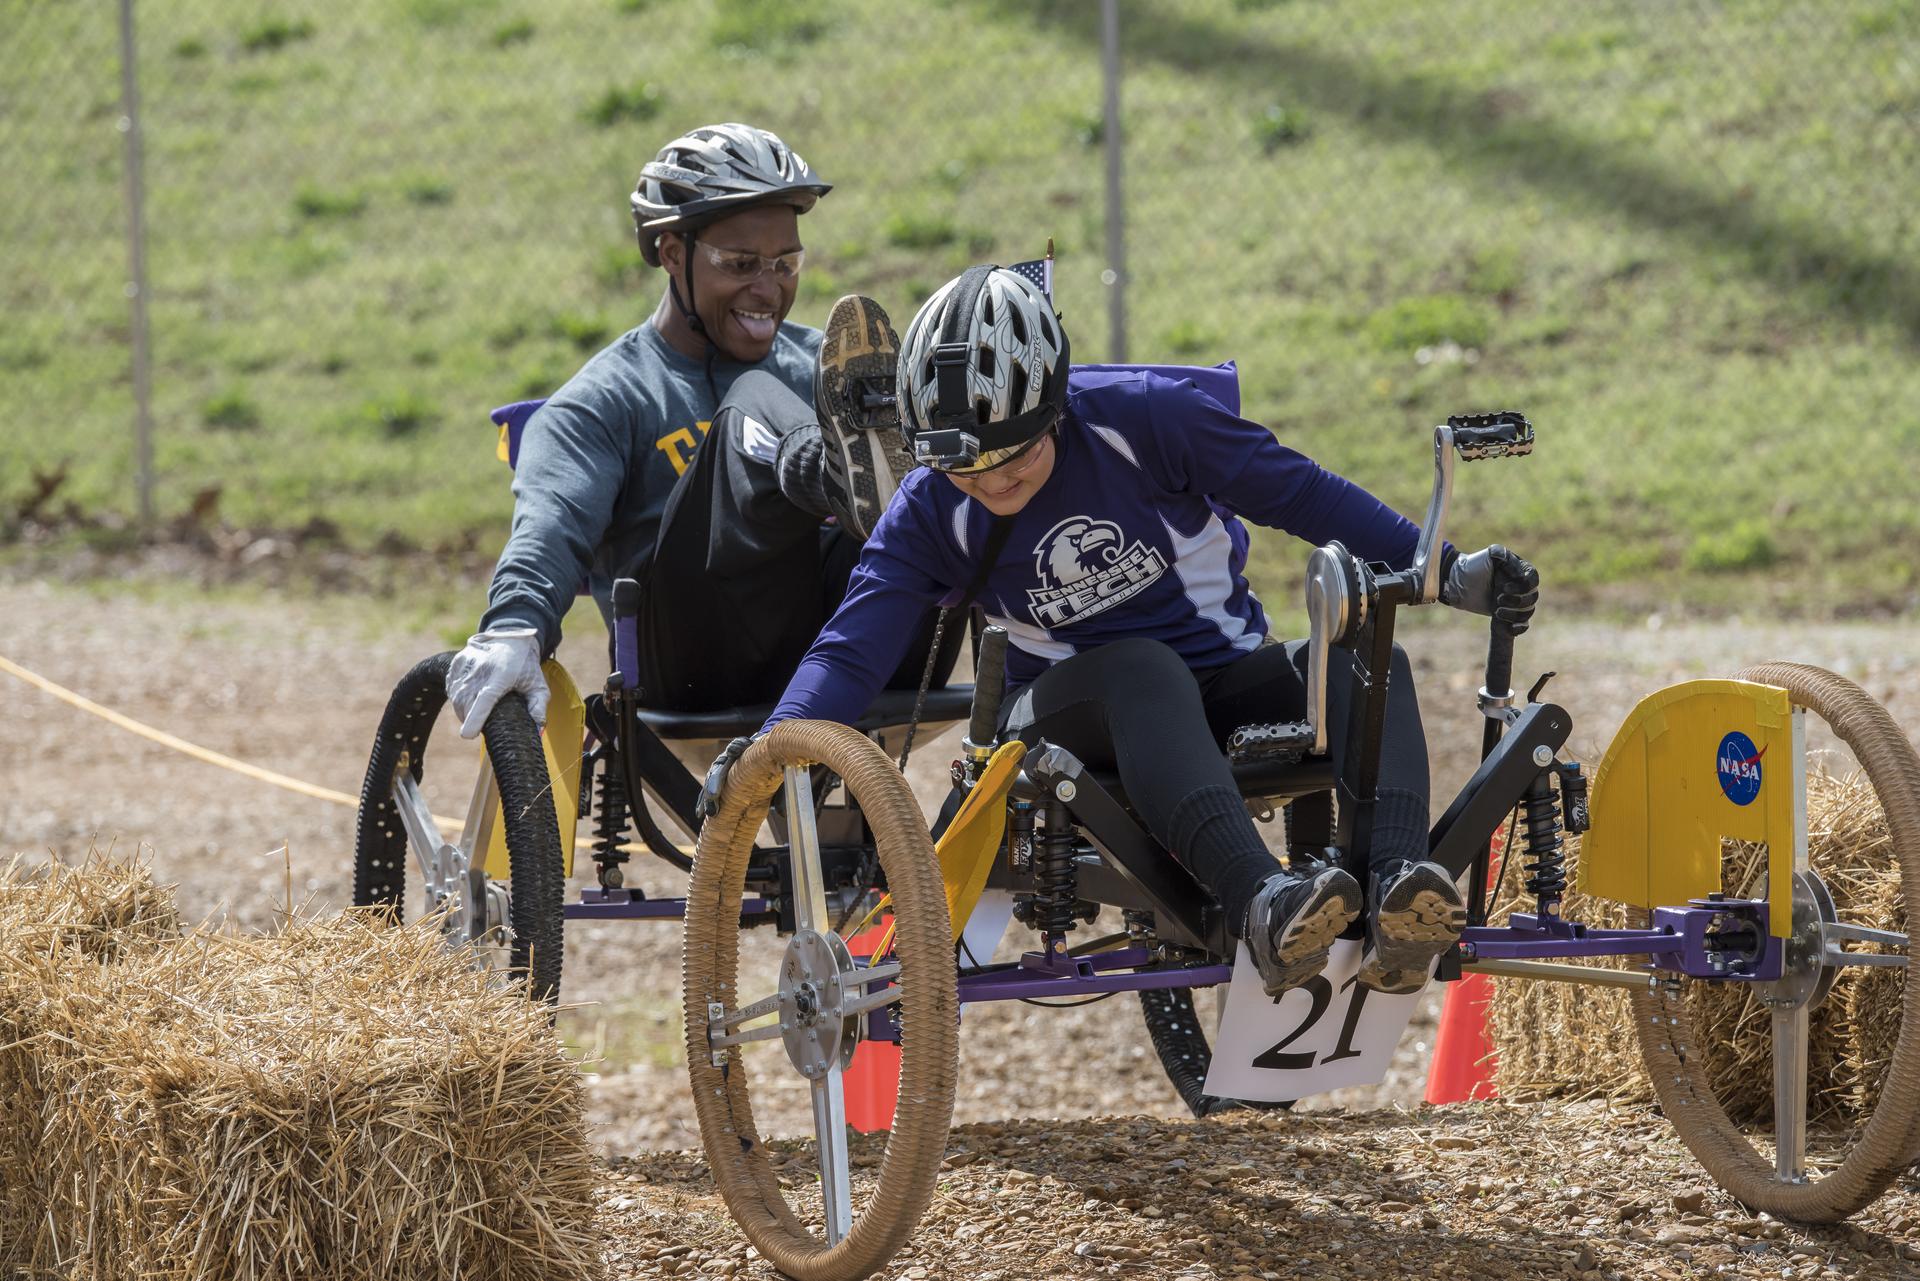 Human Exploration Rover Challenge participants at the 2018 U.S Space & Rocket Center navigate grueling obstacles.